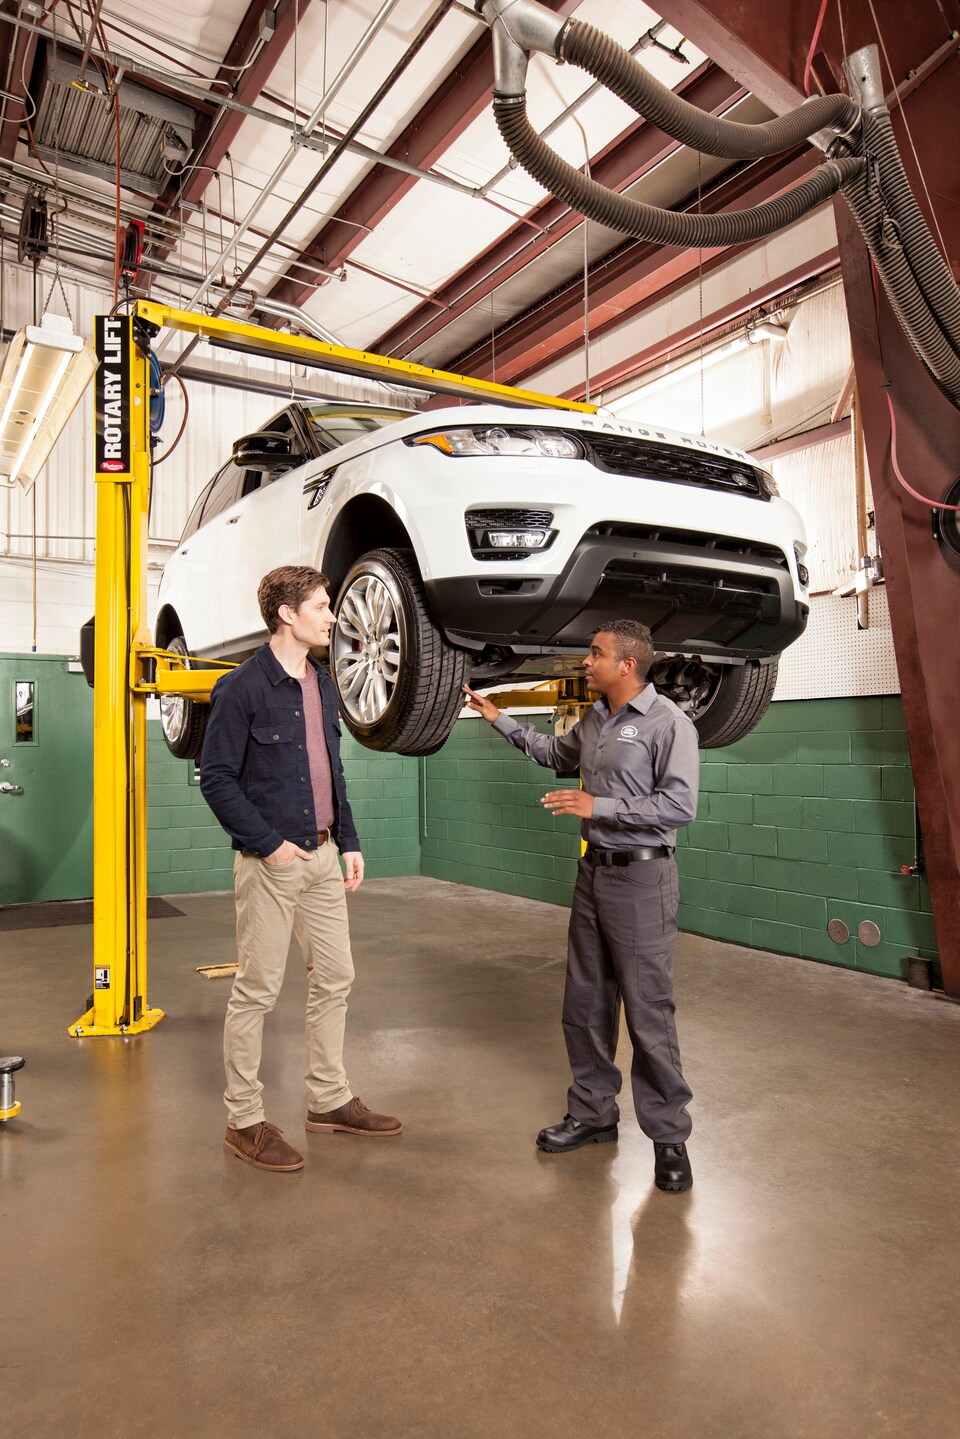 Land Rover battery, brake, and tire services in Scarborough